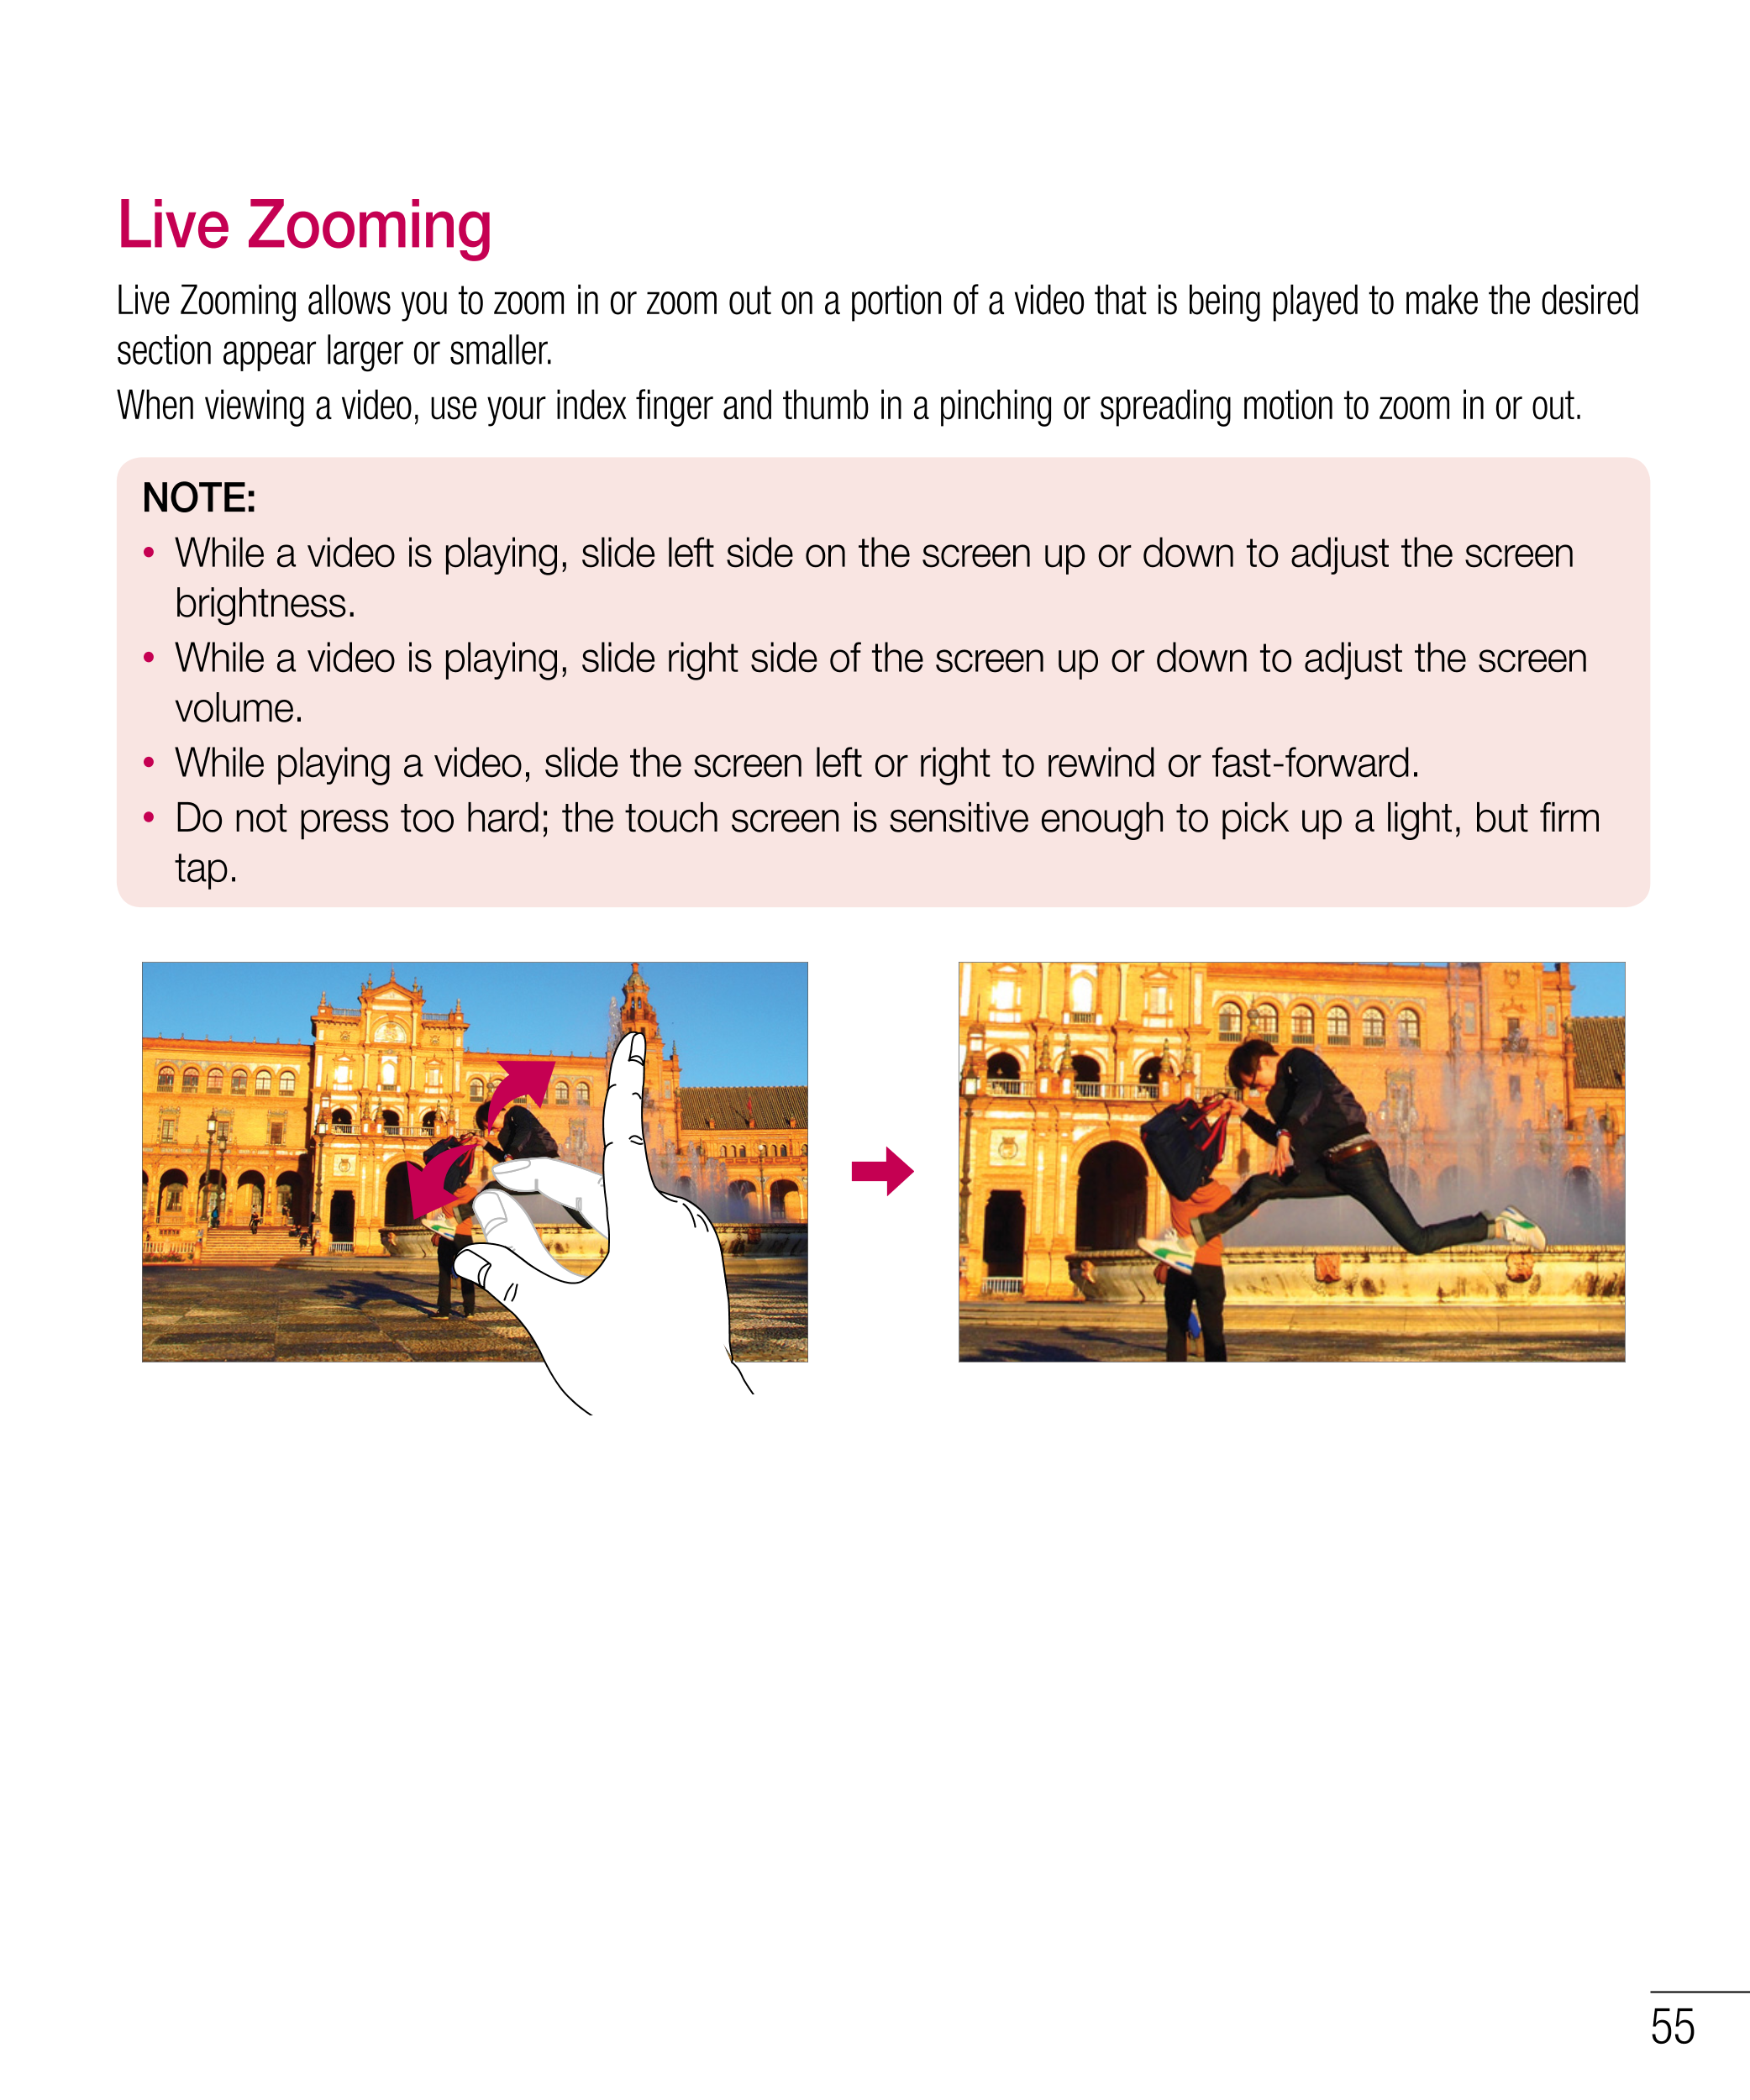 Live Zooming
Live Zooming allows you to zoom in or zoom out on a portion of a video that is being played to make the desired 
se